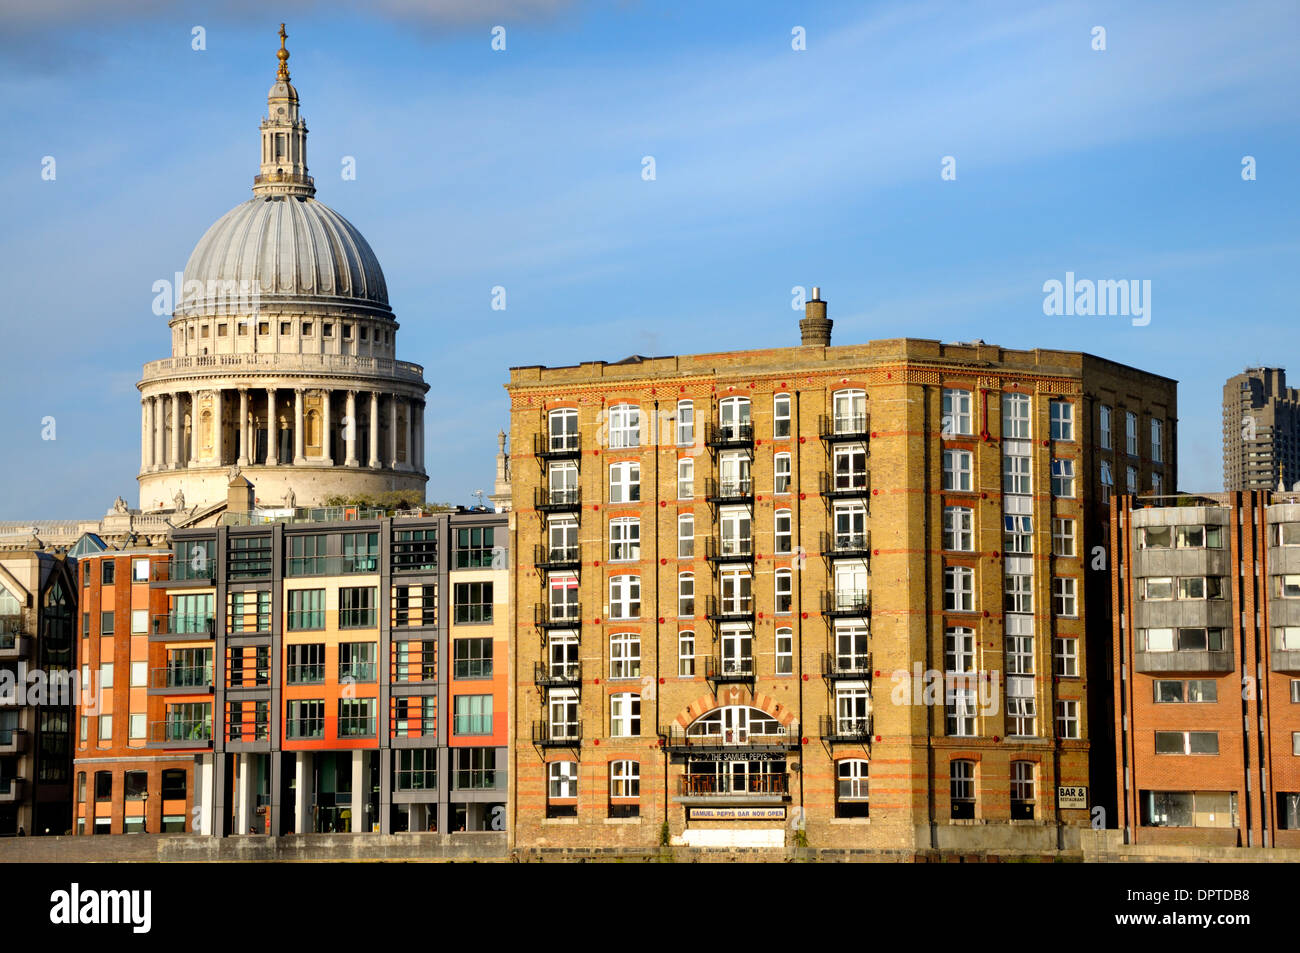 London, England, UK. St Paul's Cathedral, Sir John Lyon House (forground, left) and Globe View apartments (right) Stock Photo